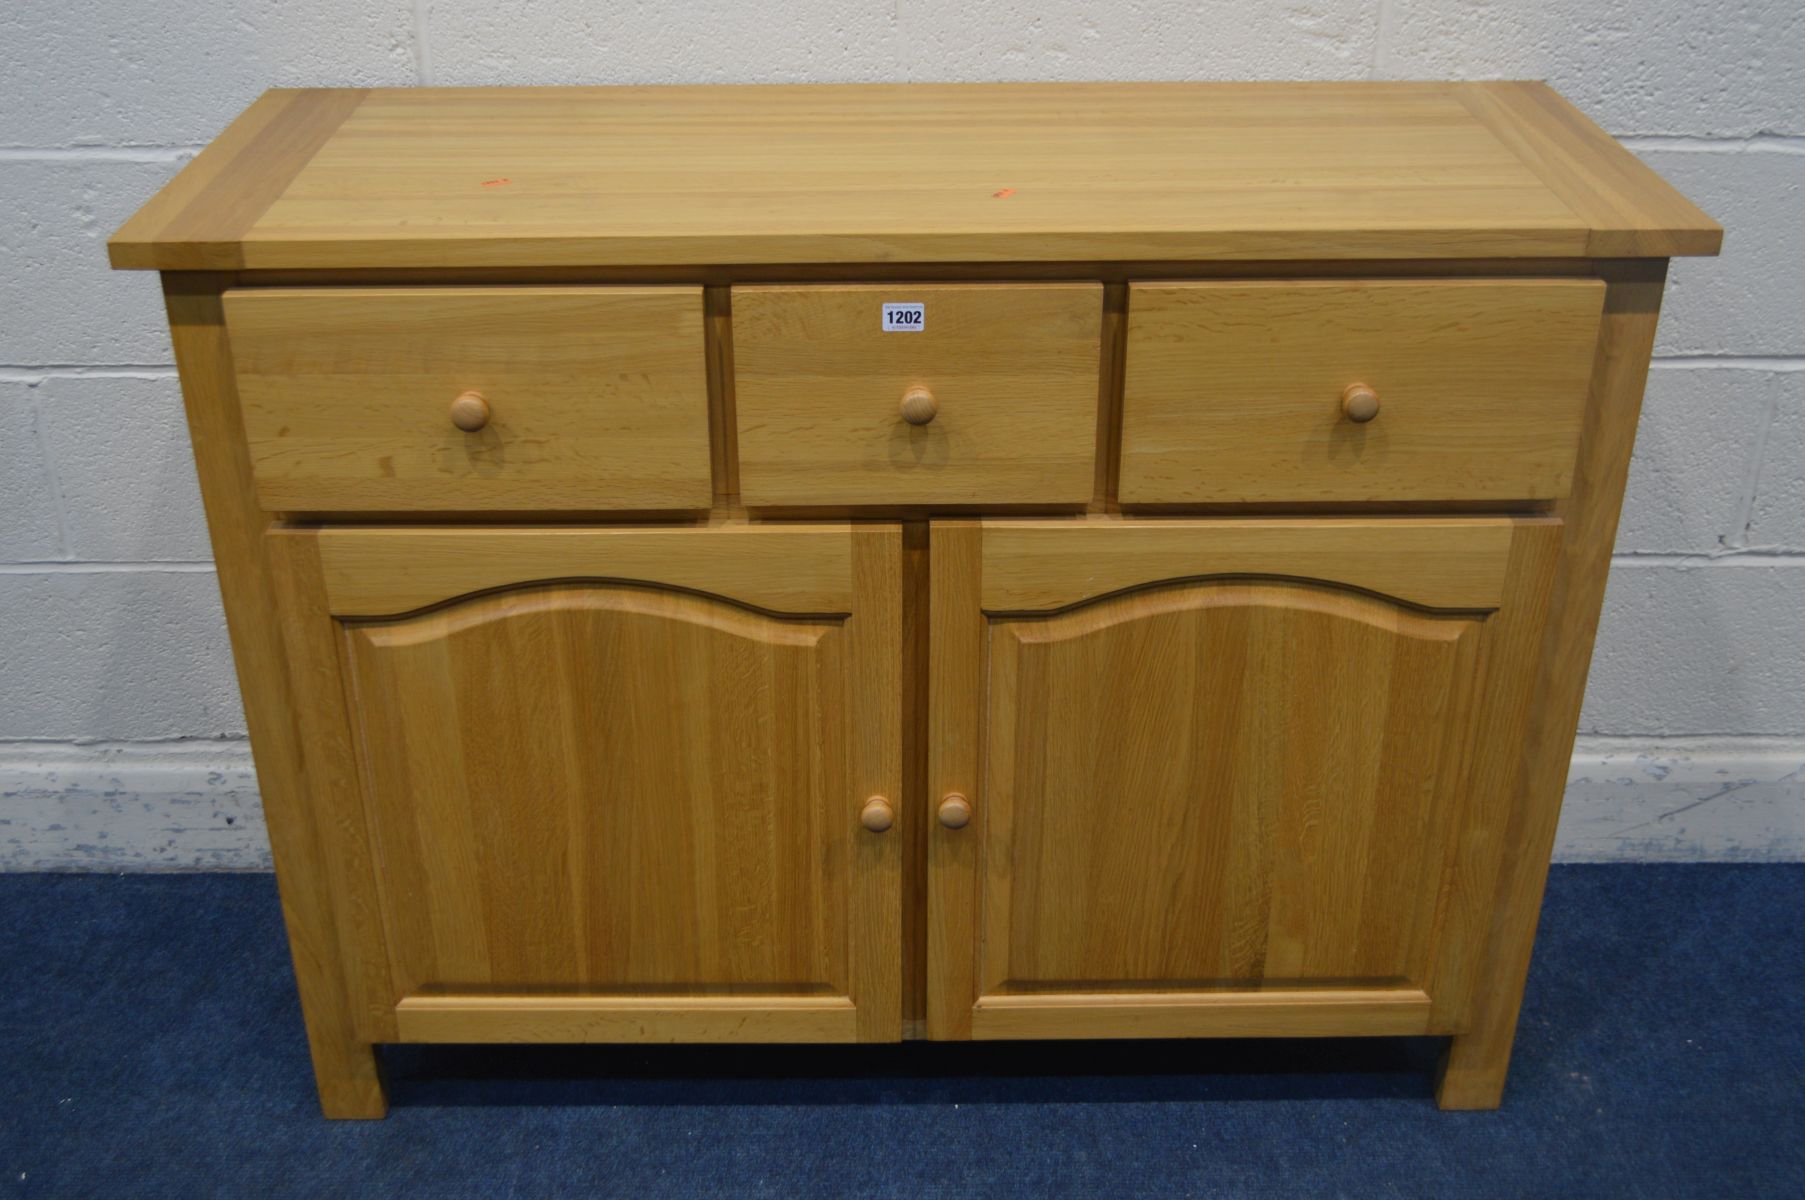 A SOLID LIGHT OAK SIDEBOARD, with three drawers, width 120cm x depth 45cm x height 90cm